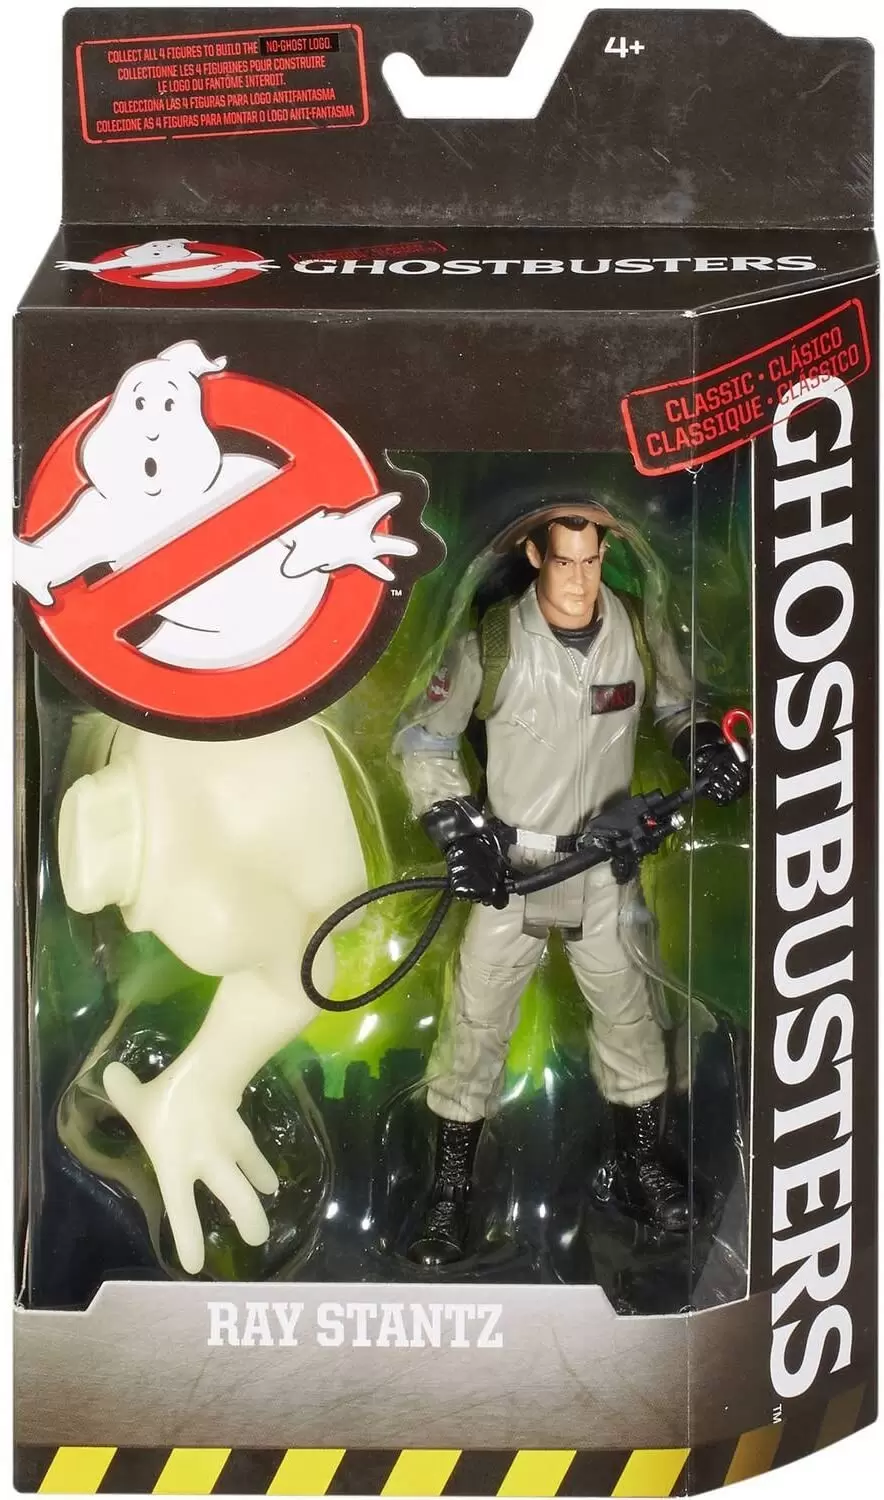 Ghostbusters Classic Figures - Ray Stantz